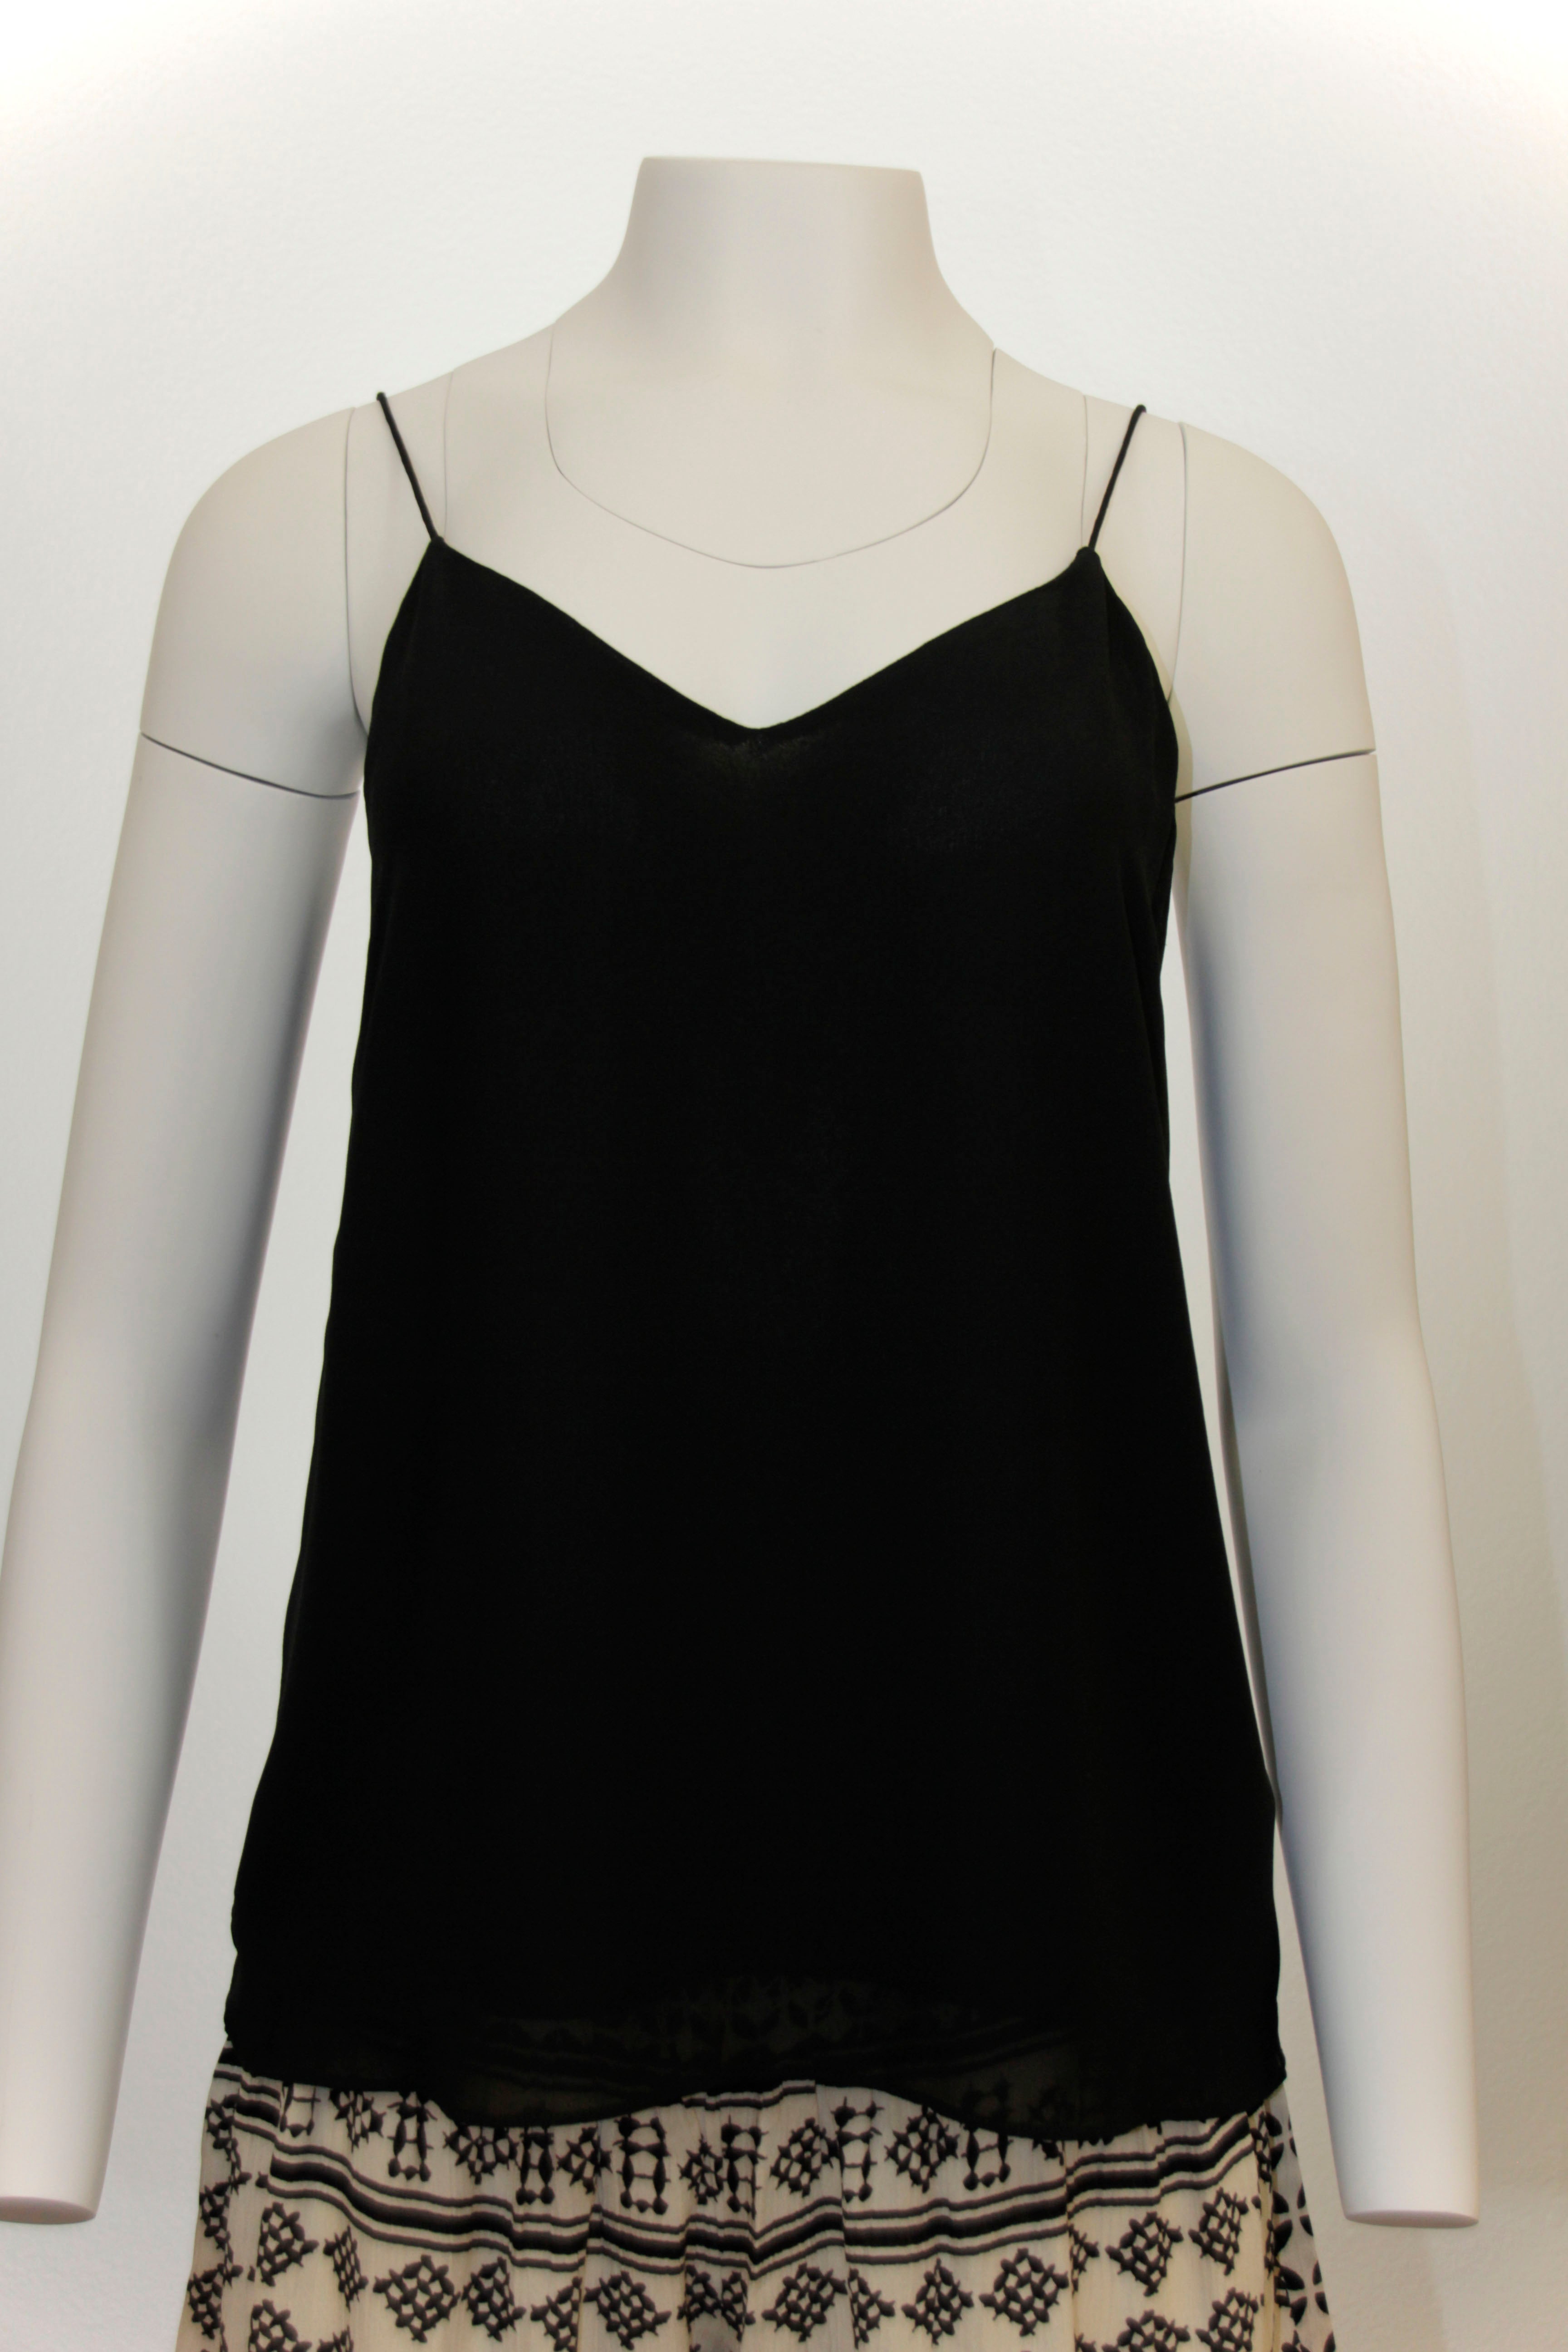 T23 Back detail Camisole